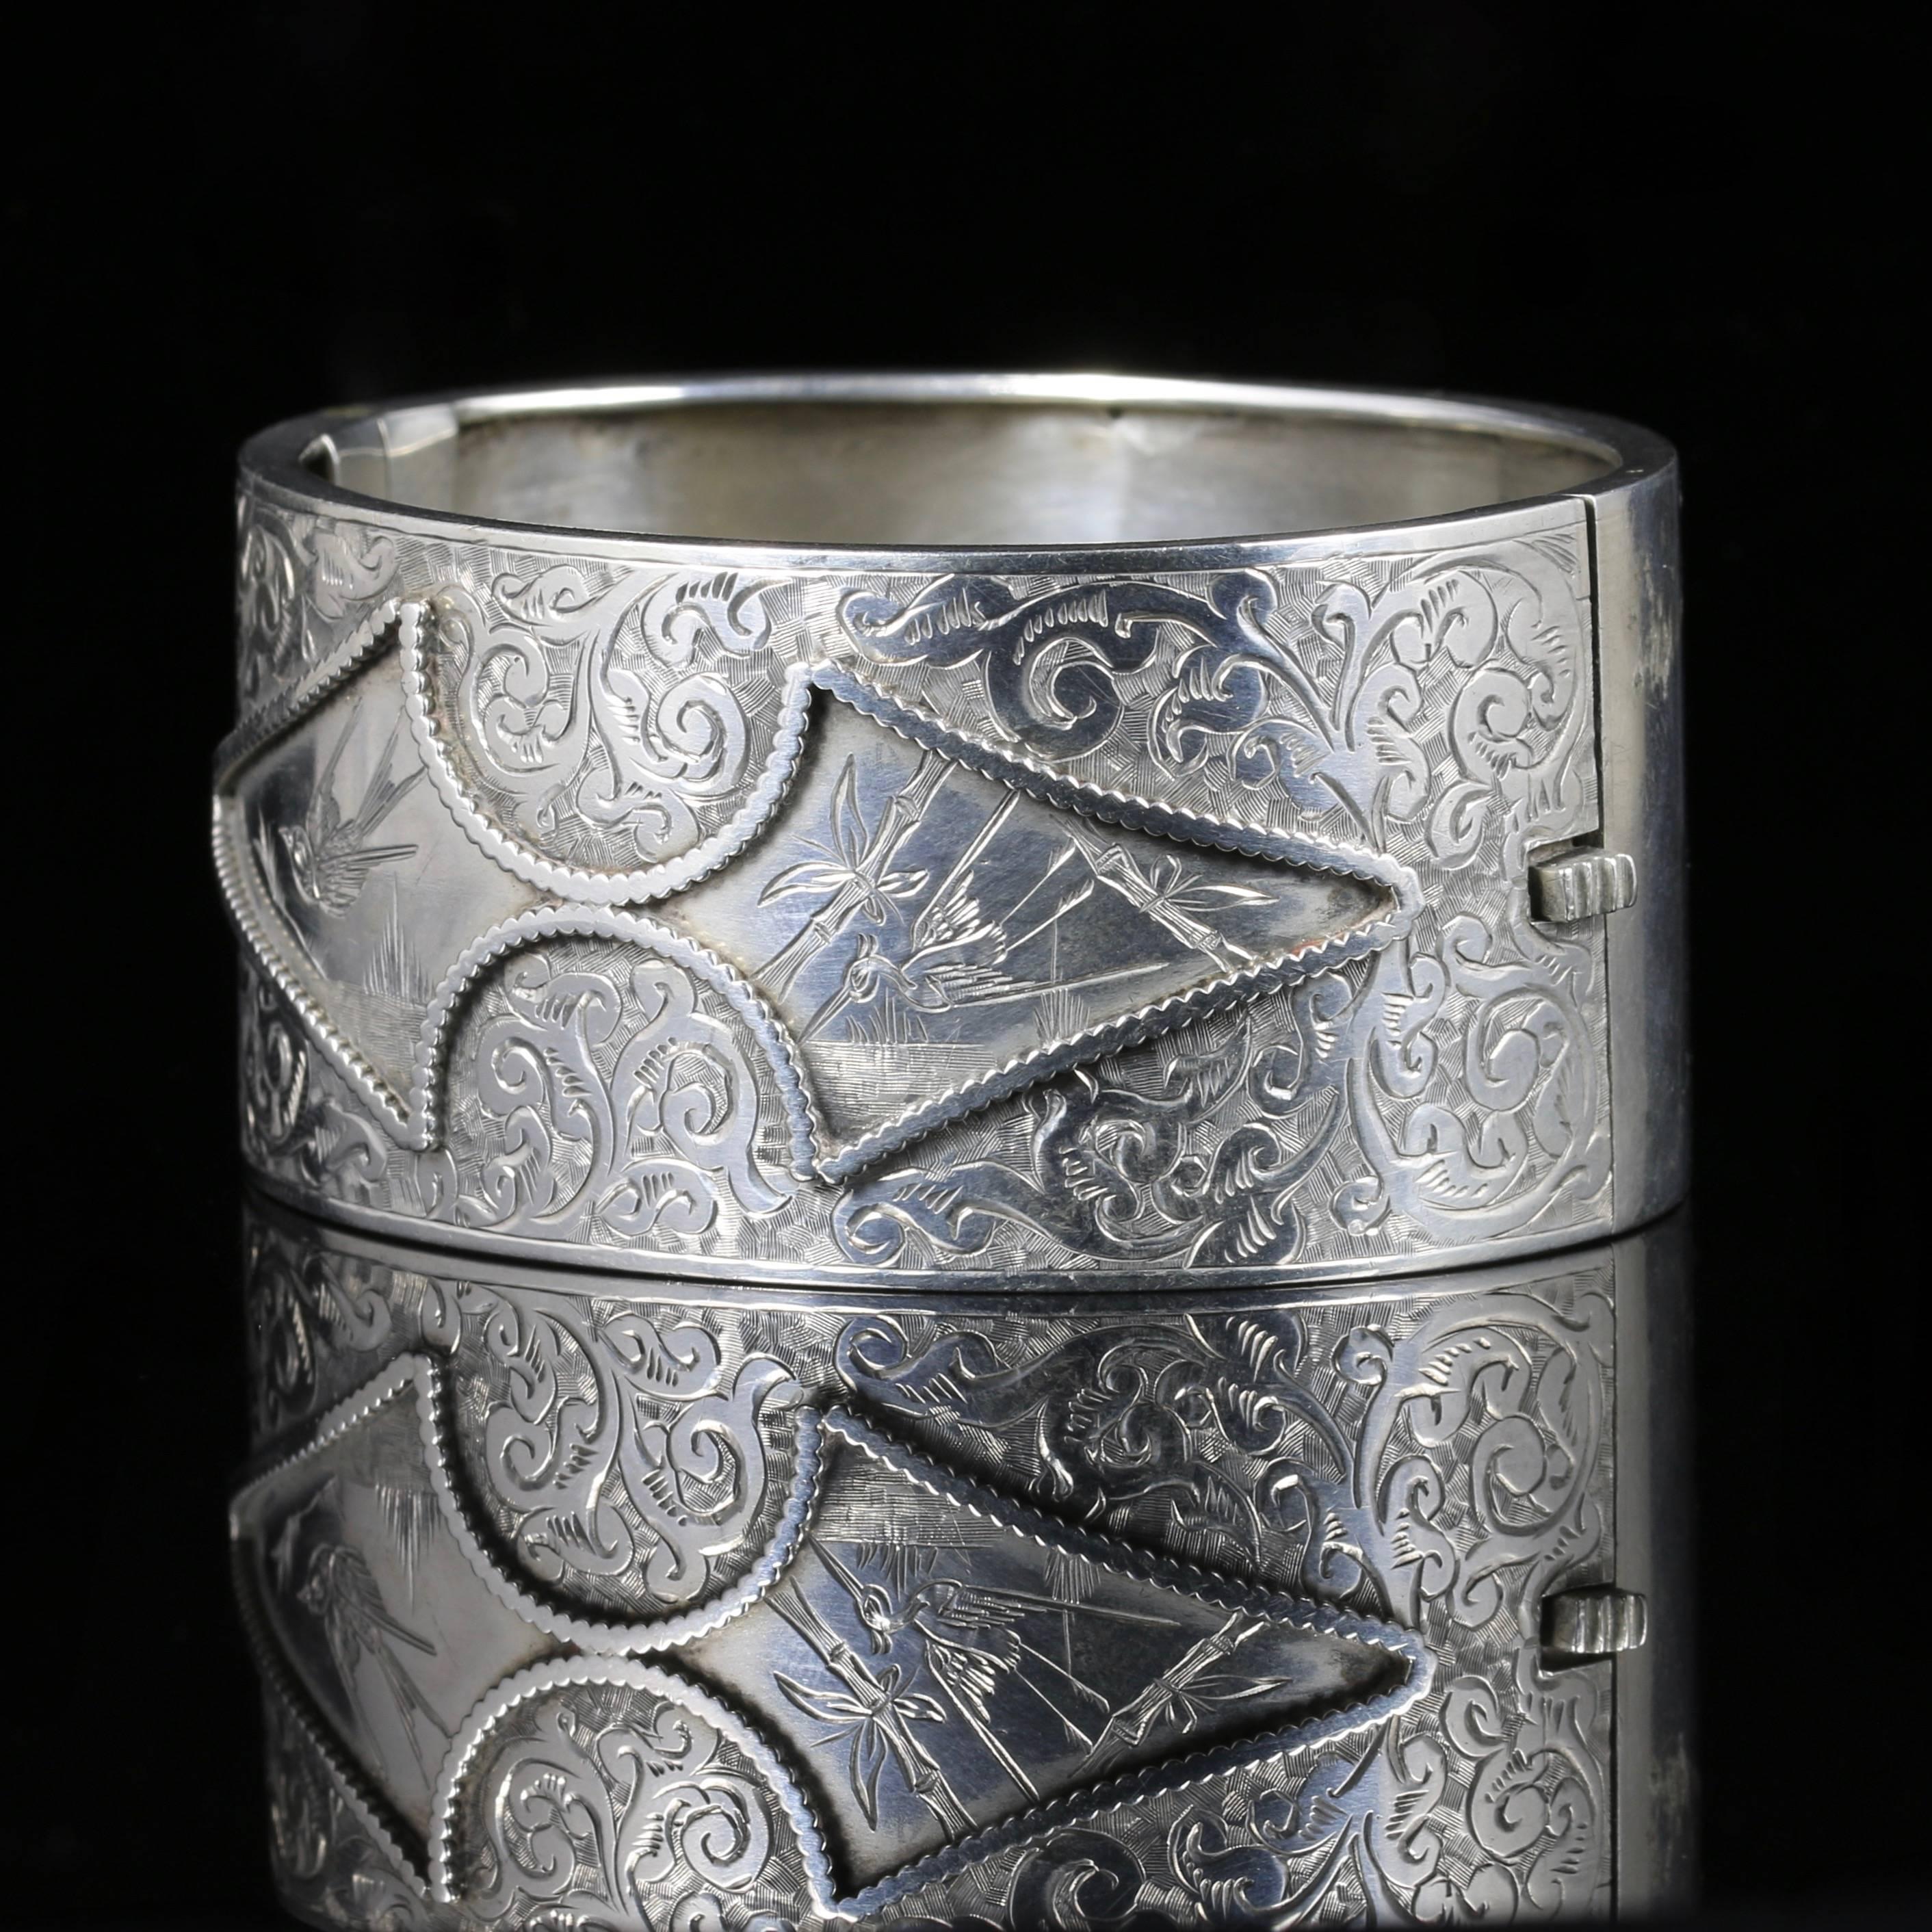 This beautiful sterling Silver wide cuff bangle is steeped in English history, purchased in London.

Circa 1880

Set with lovely engraving across the top gallery which includes birds and folate detail.

There is an inscription on the under carriage